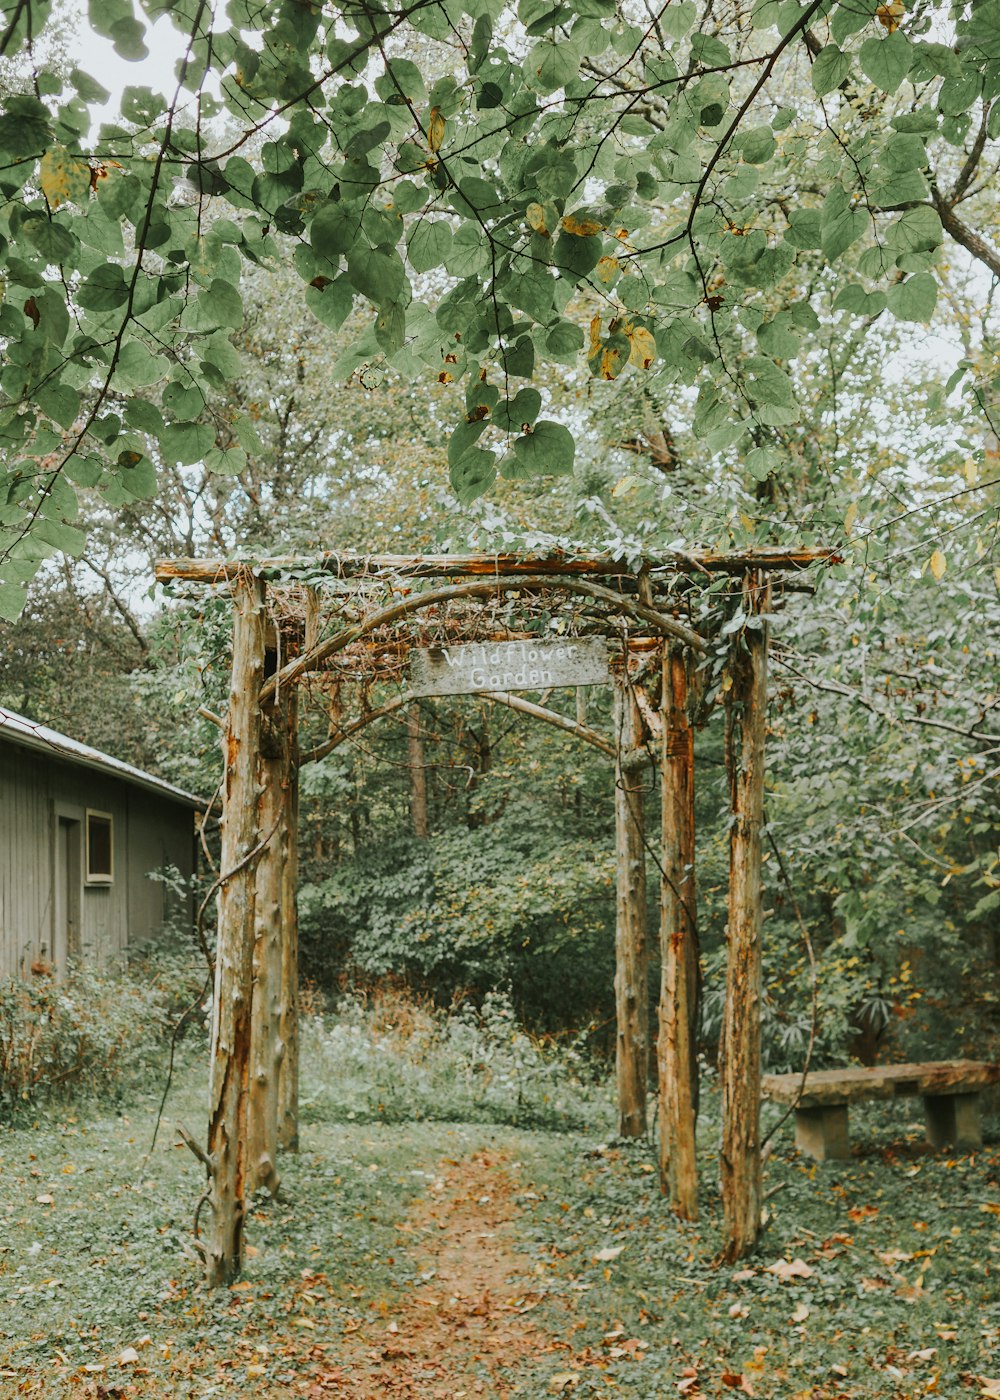 a wooden arbor in a yard with a house in the background